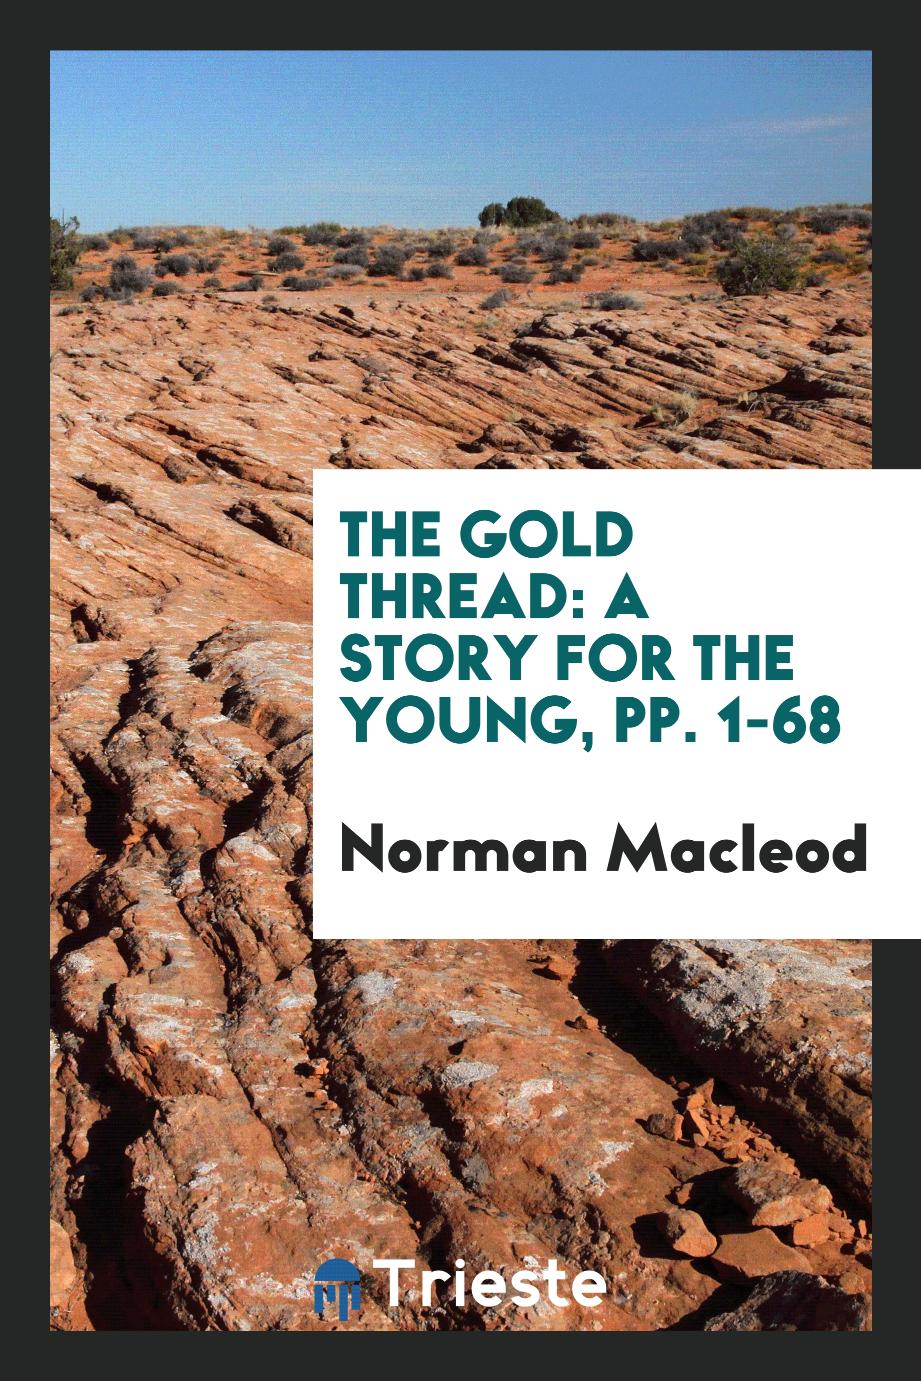 The Gold Thread: A Story for the Young, pp. 1-68